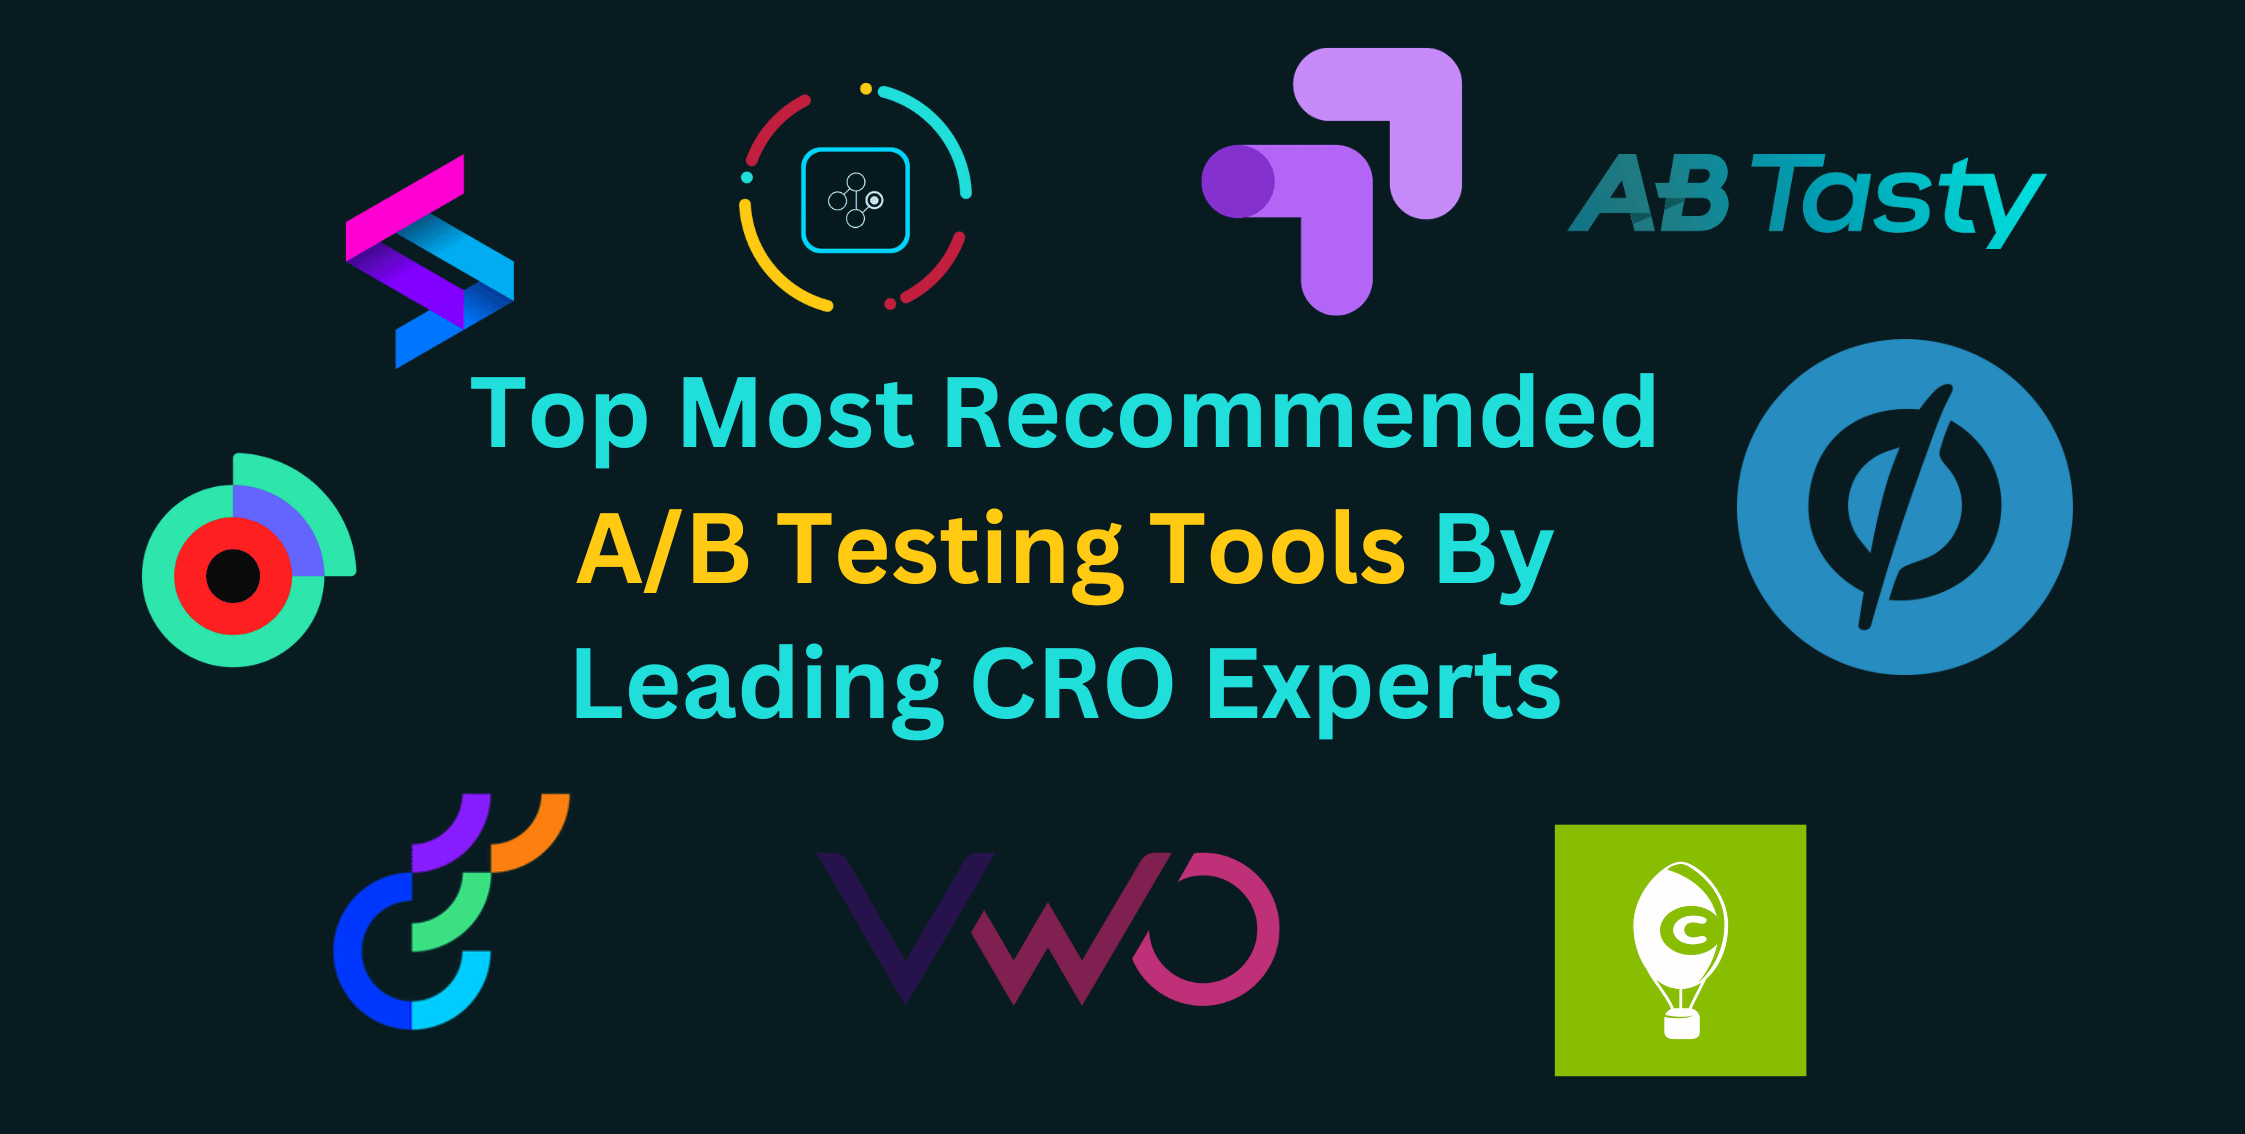 Top A/B Testing Tools - Recommendations by CRO Experts